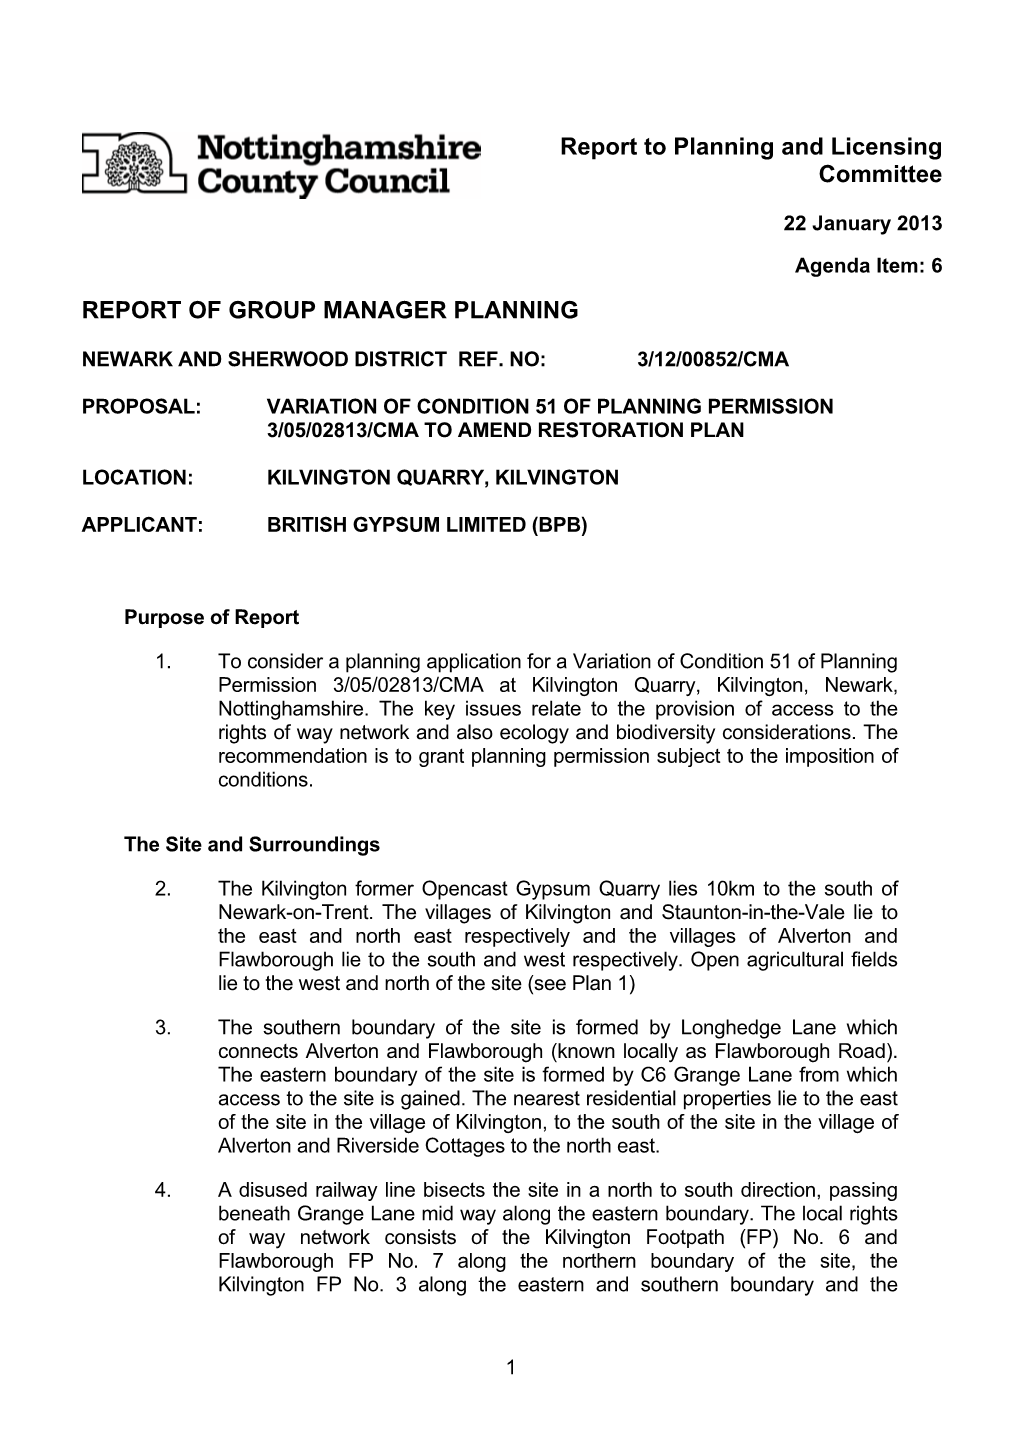 Report to Planning and Licensing Committee REPORT of GROUP